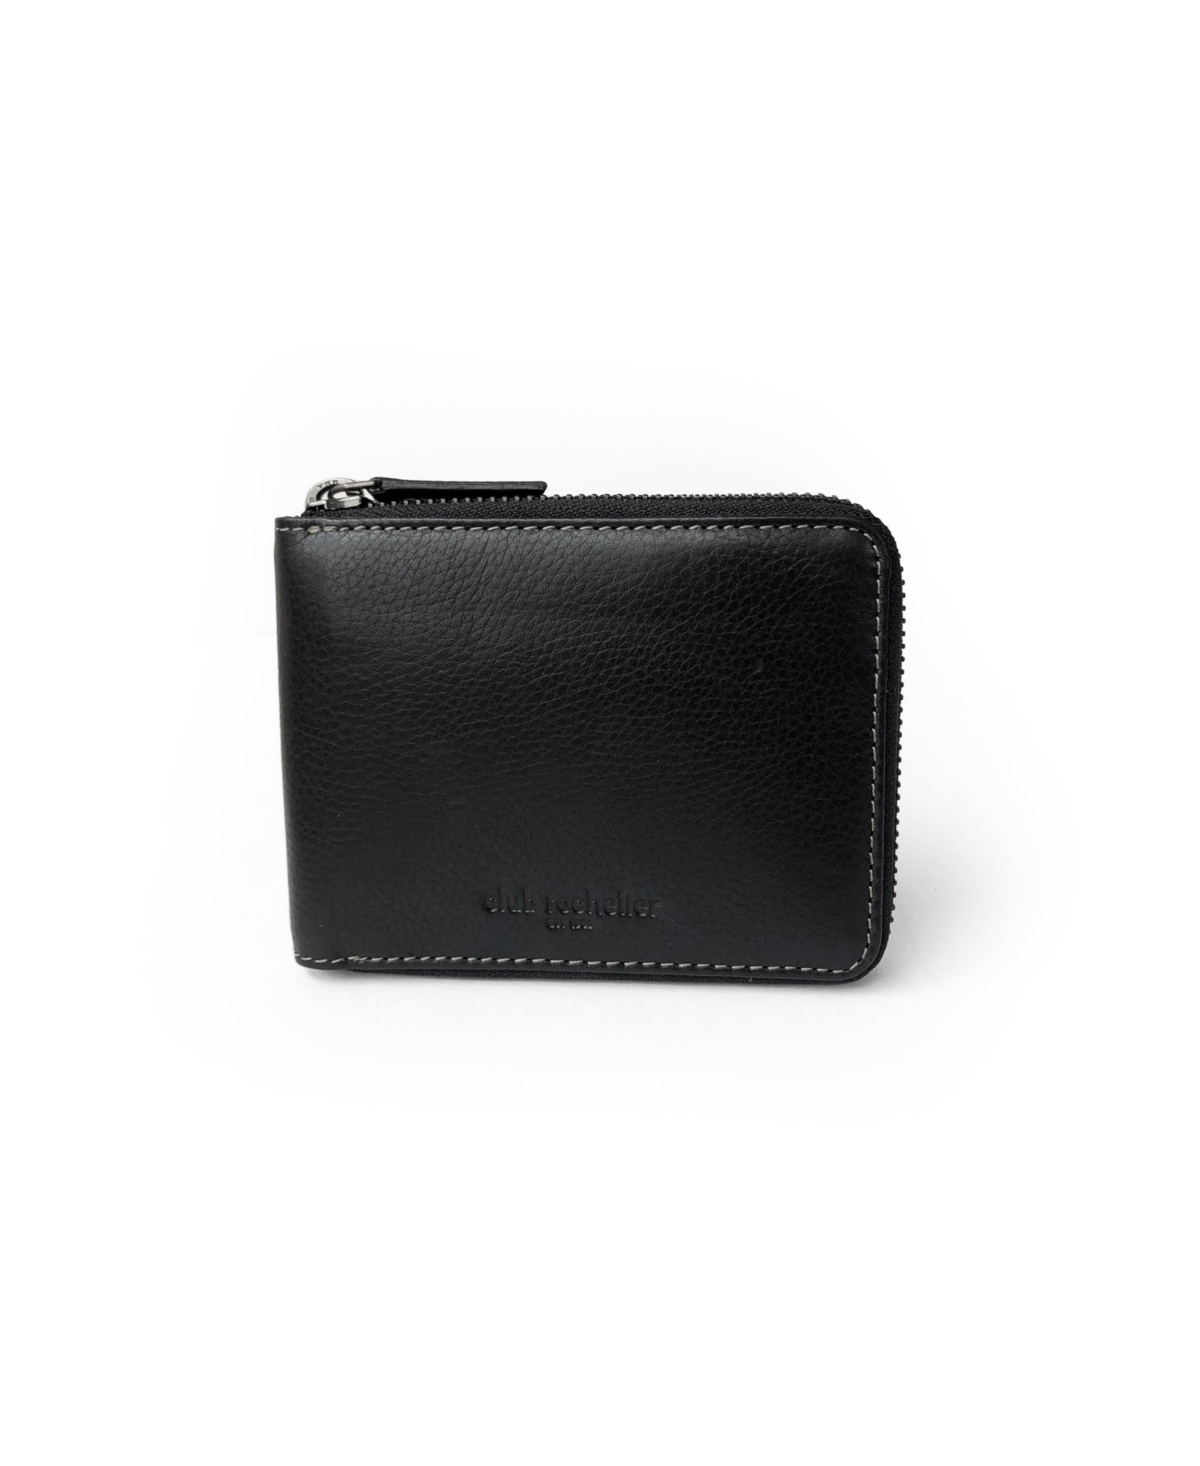 Men's Full Leather Zipper Around Wallet with Center Wing - Navy